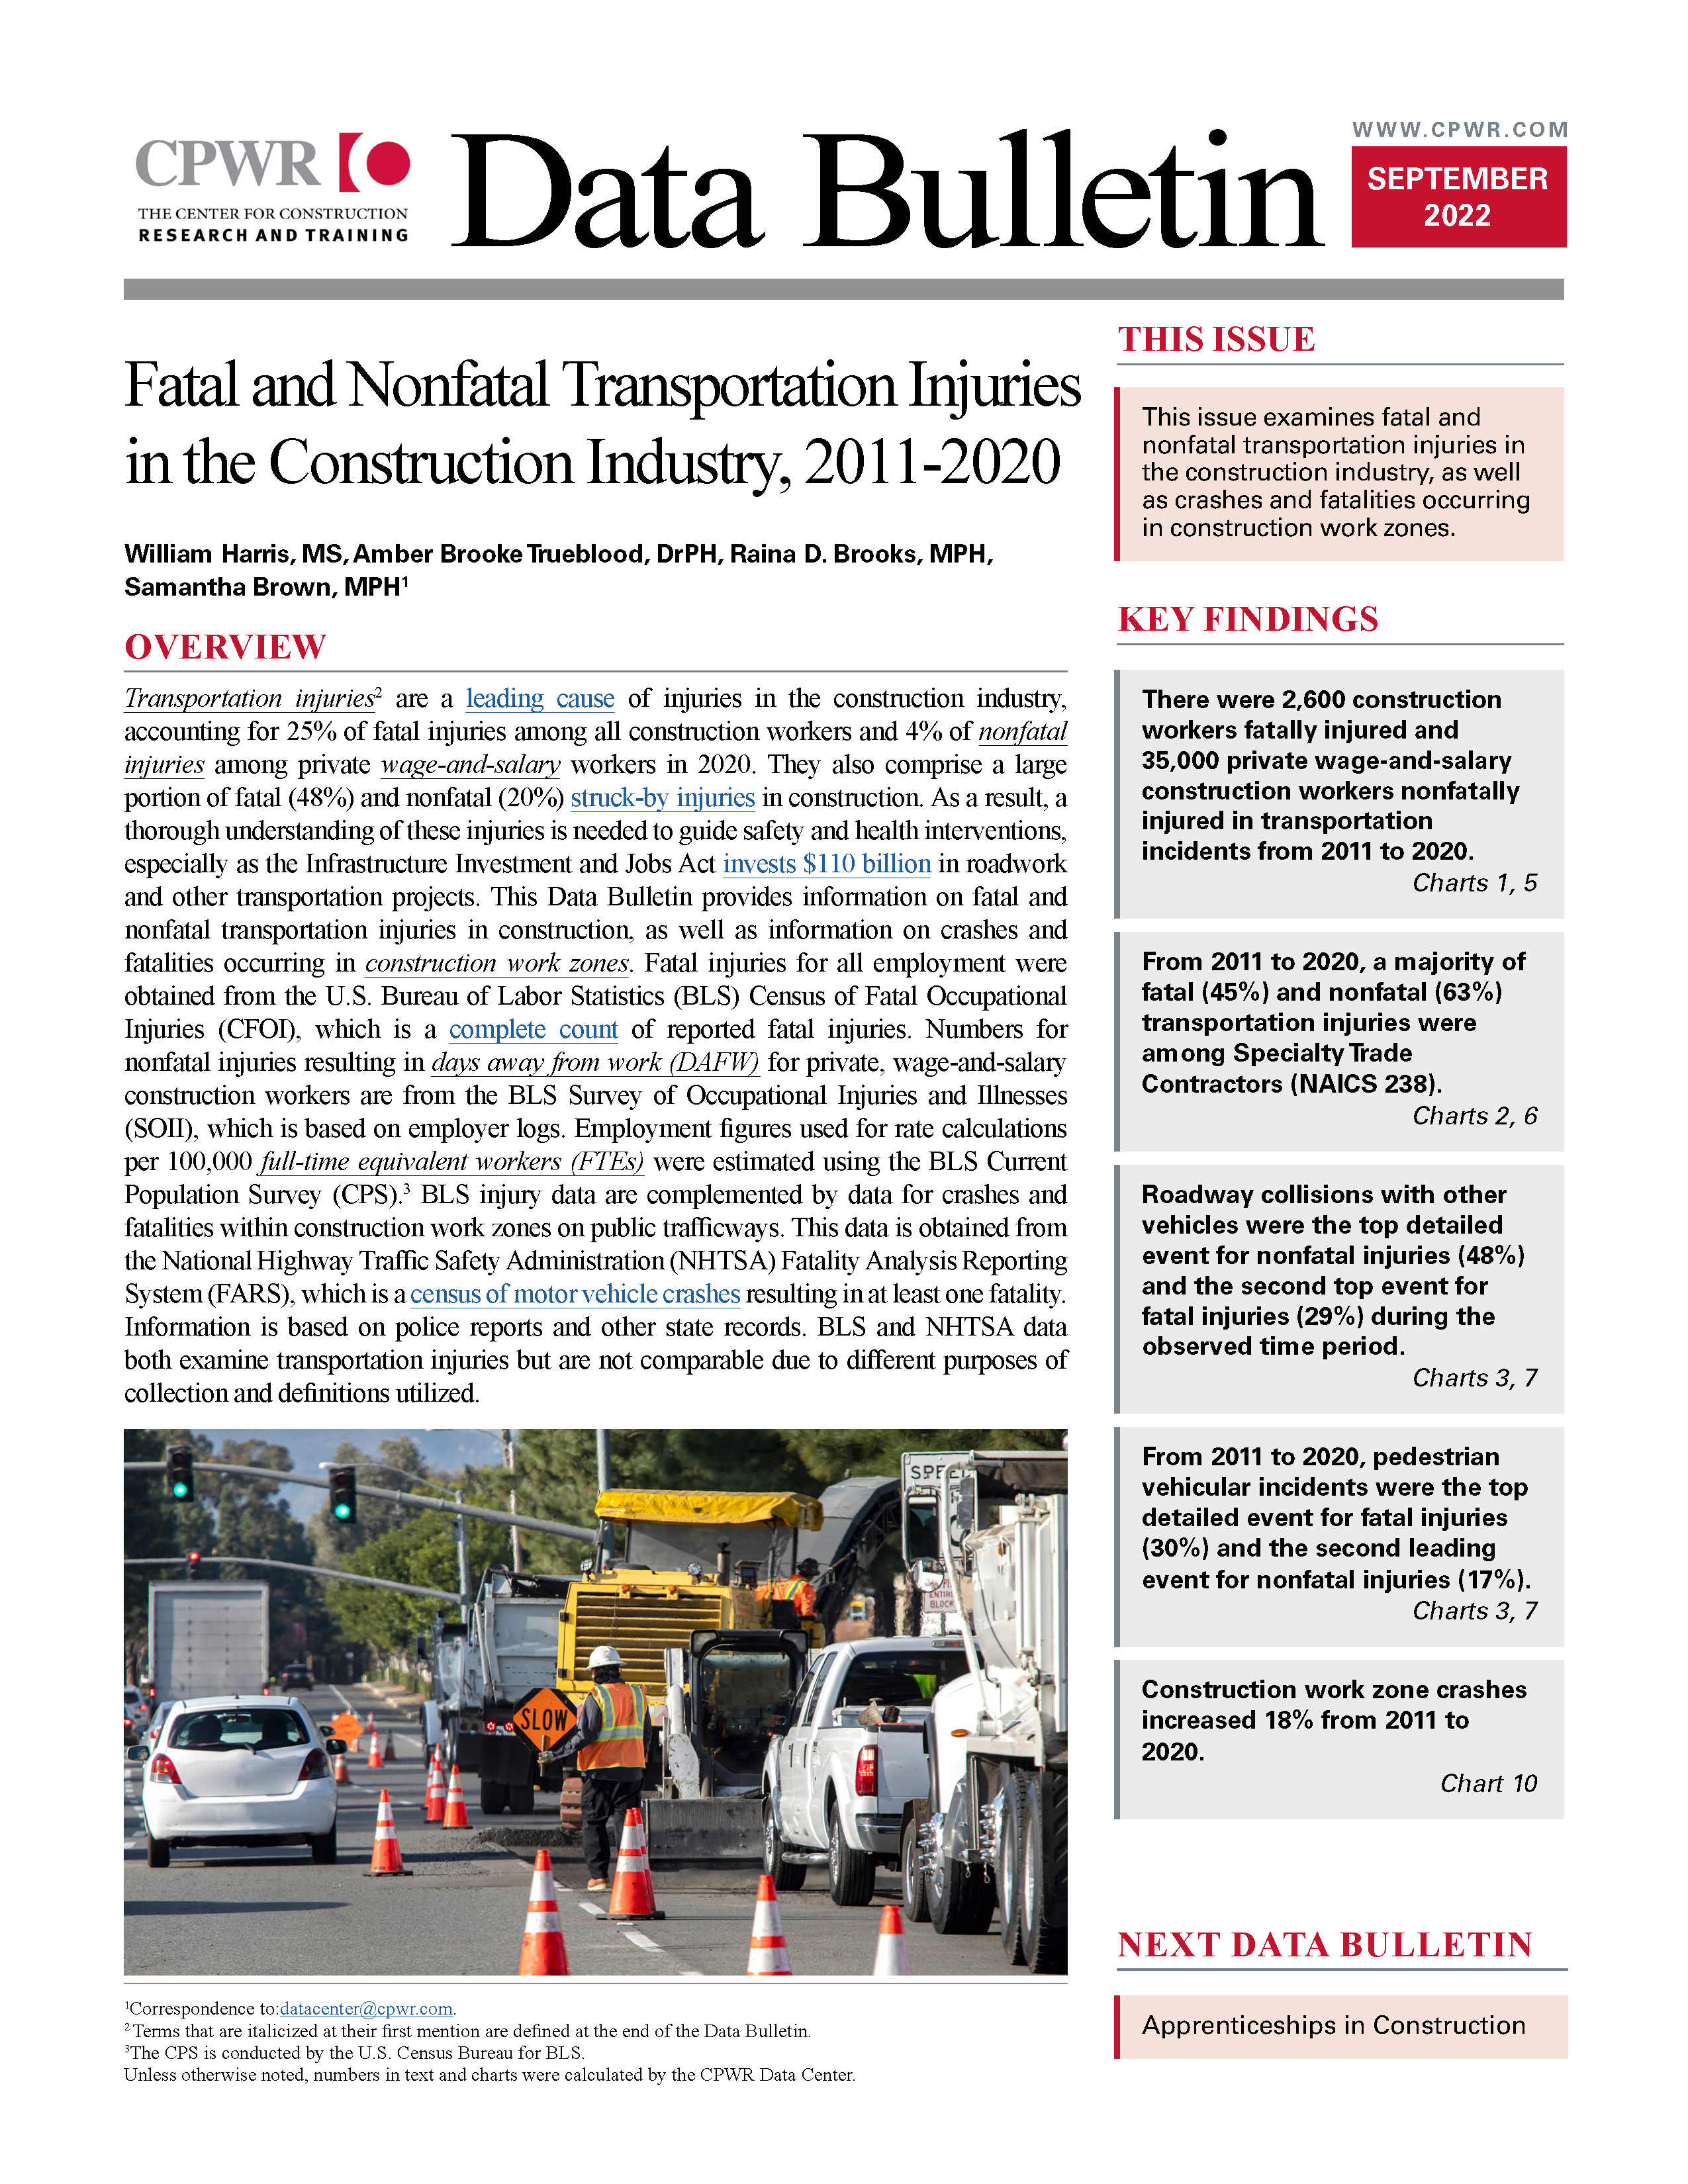 cover of September 2022 Data Bulleting with title, this issue details, key findings listed, an introduction to the publication and an image of a worker on a street with orange cones situated for traffic safety.